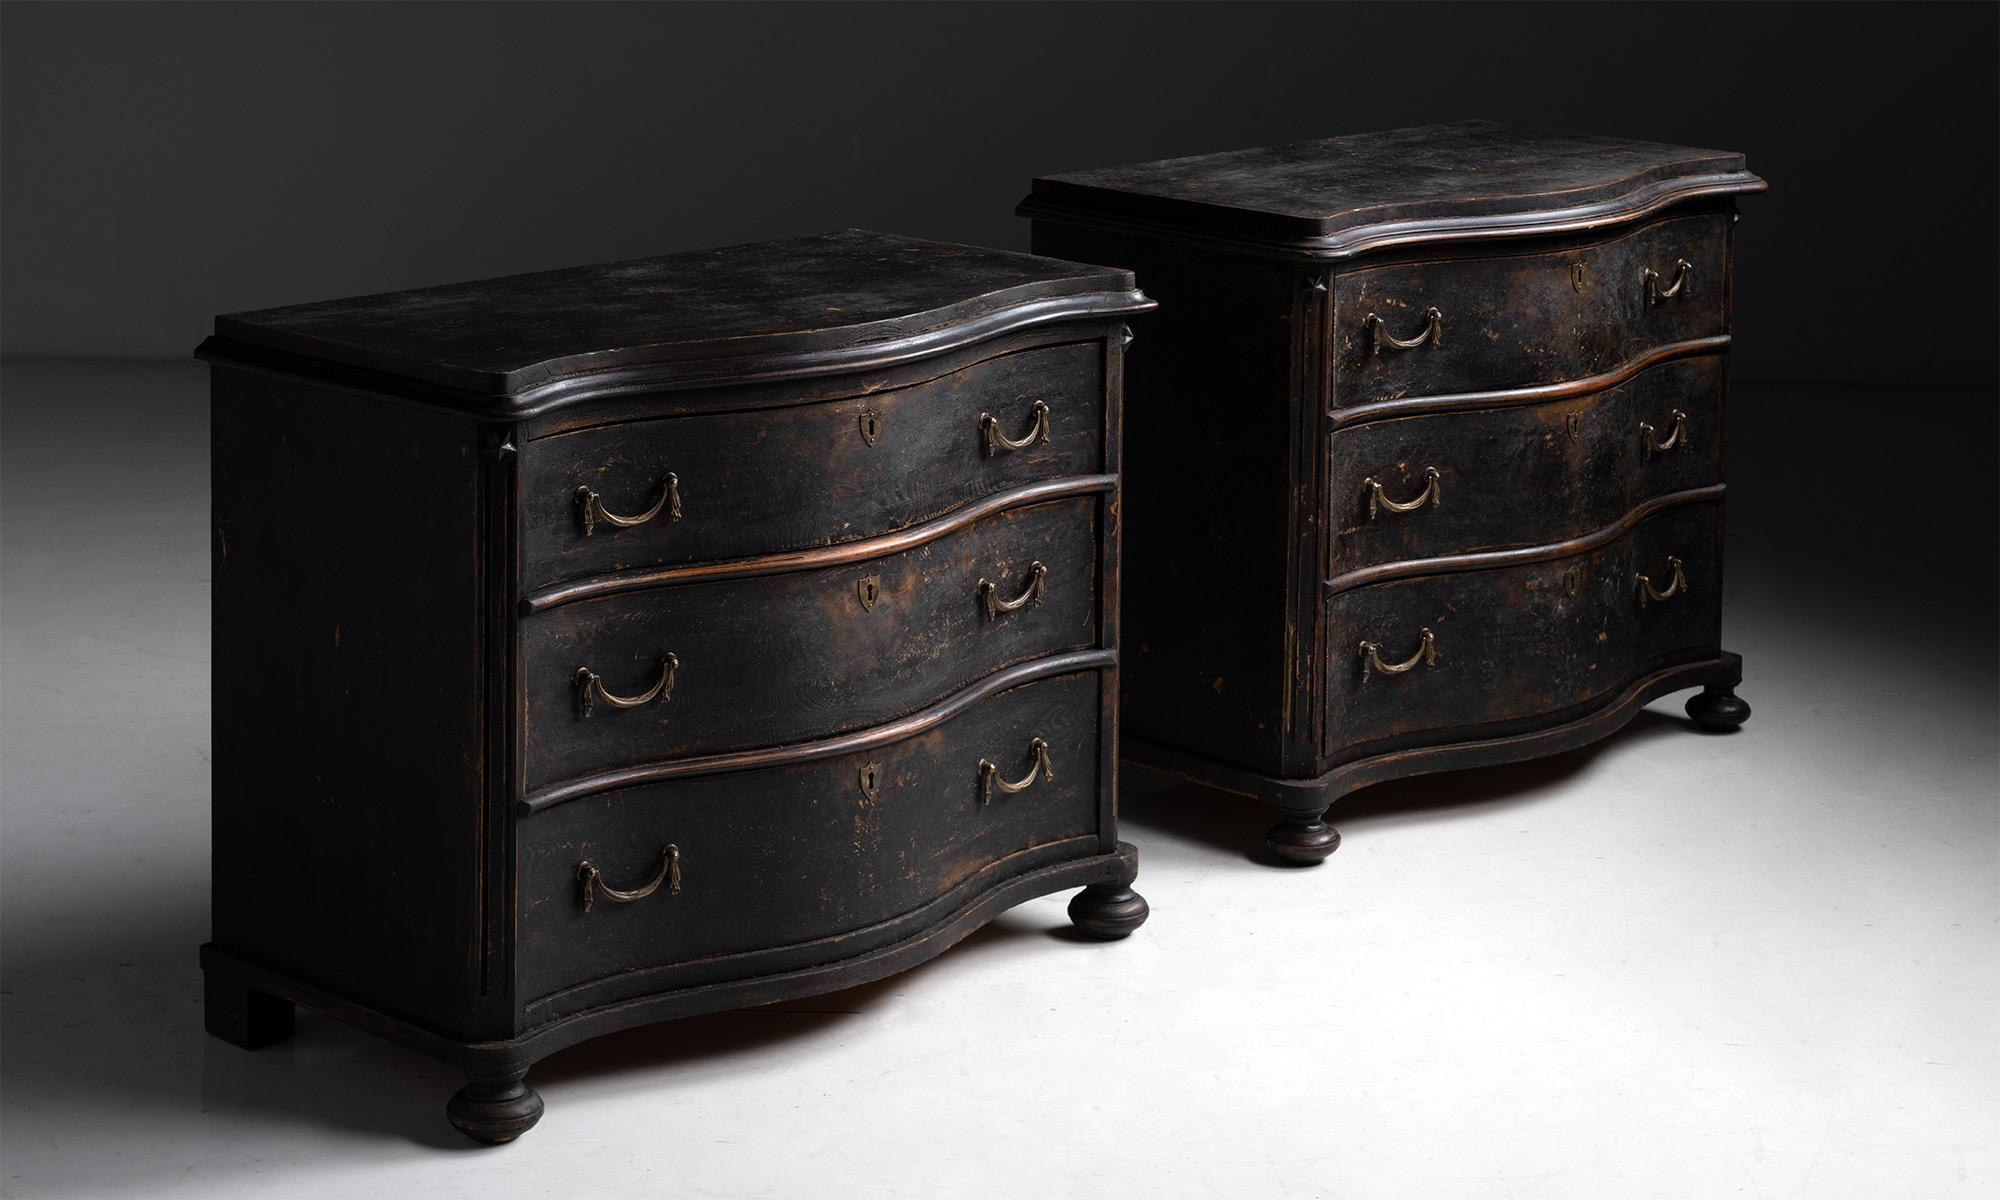 *Please note the price is per unit, and the commodes are sold individually*

Serpentine Commode

Sweden circa 1830

Three drawer chest with beautifully curved “Serpentine” front in original period black finish.

LEFT: 37”L x 19”d x 30.25”h / RIGHT: